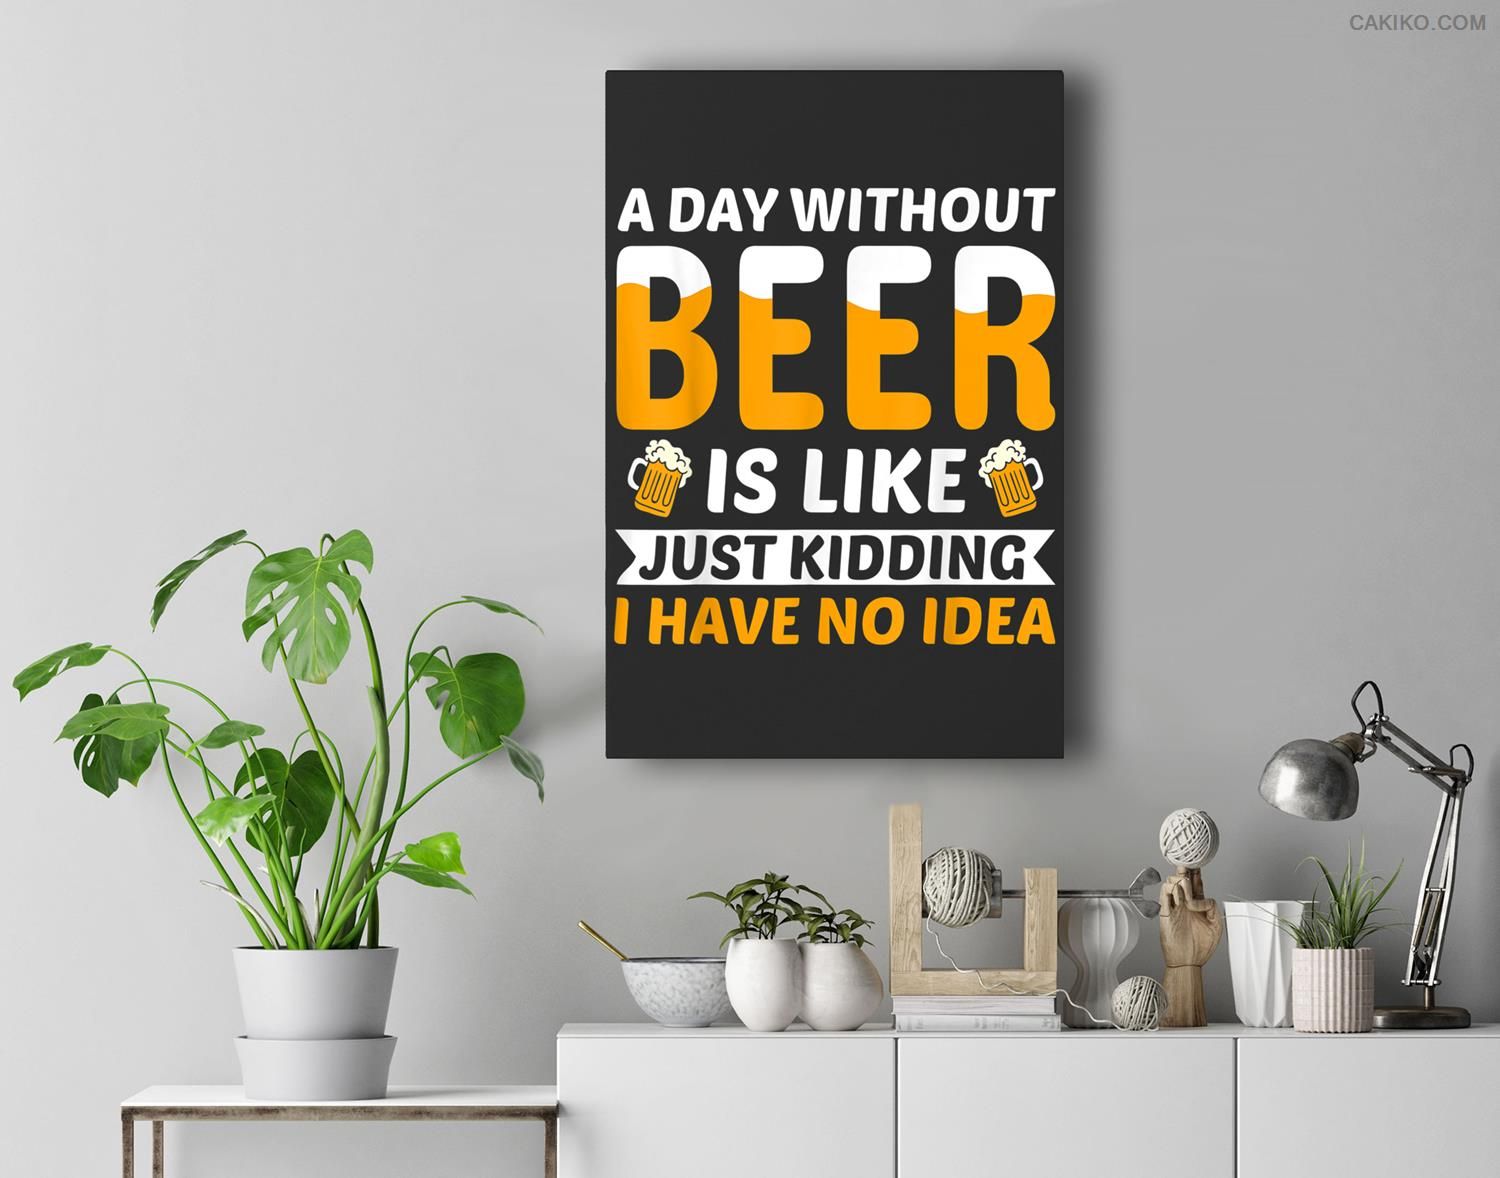 A Day Without Beer Is Like Just Kidding I Have No Idea Beer Premium Wall Art Canvas Decor